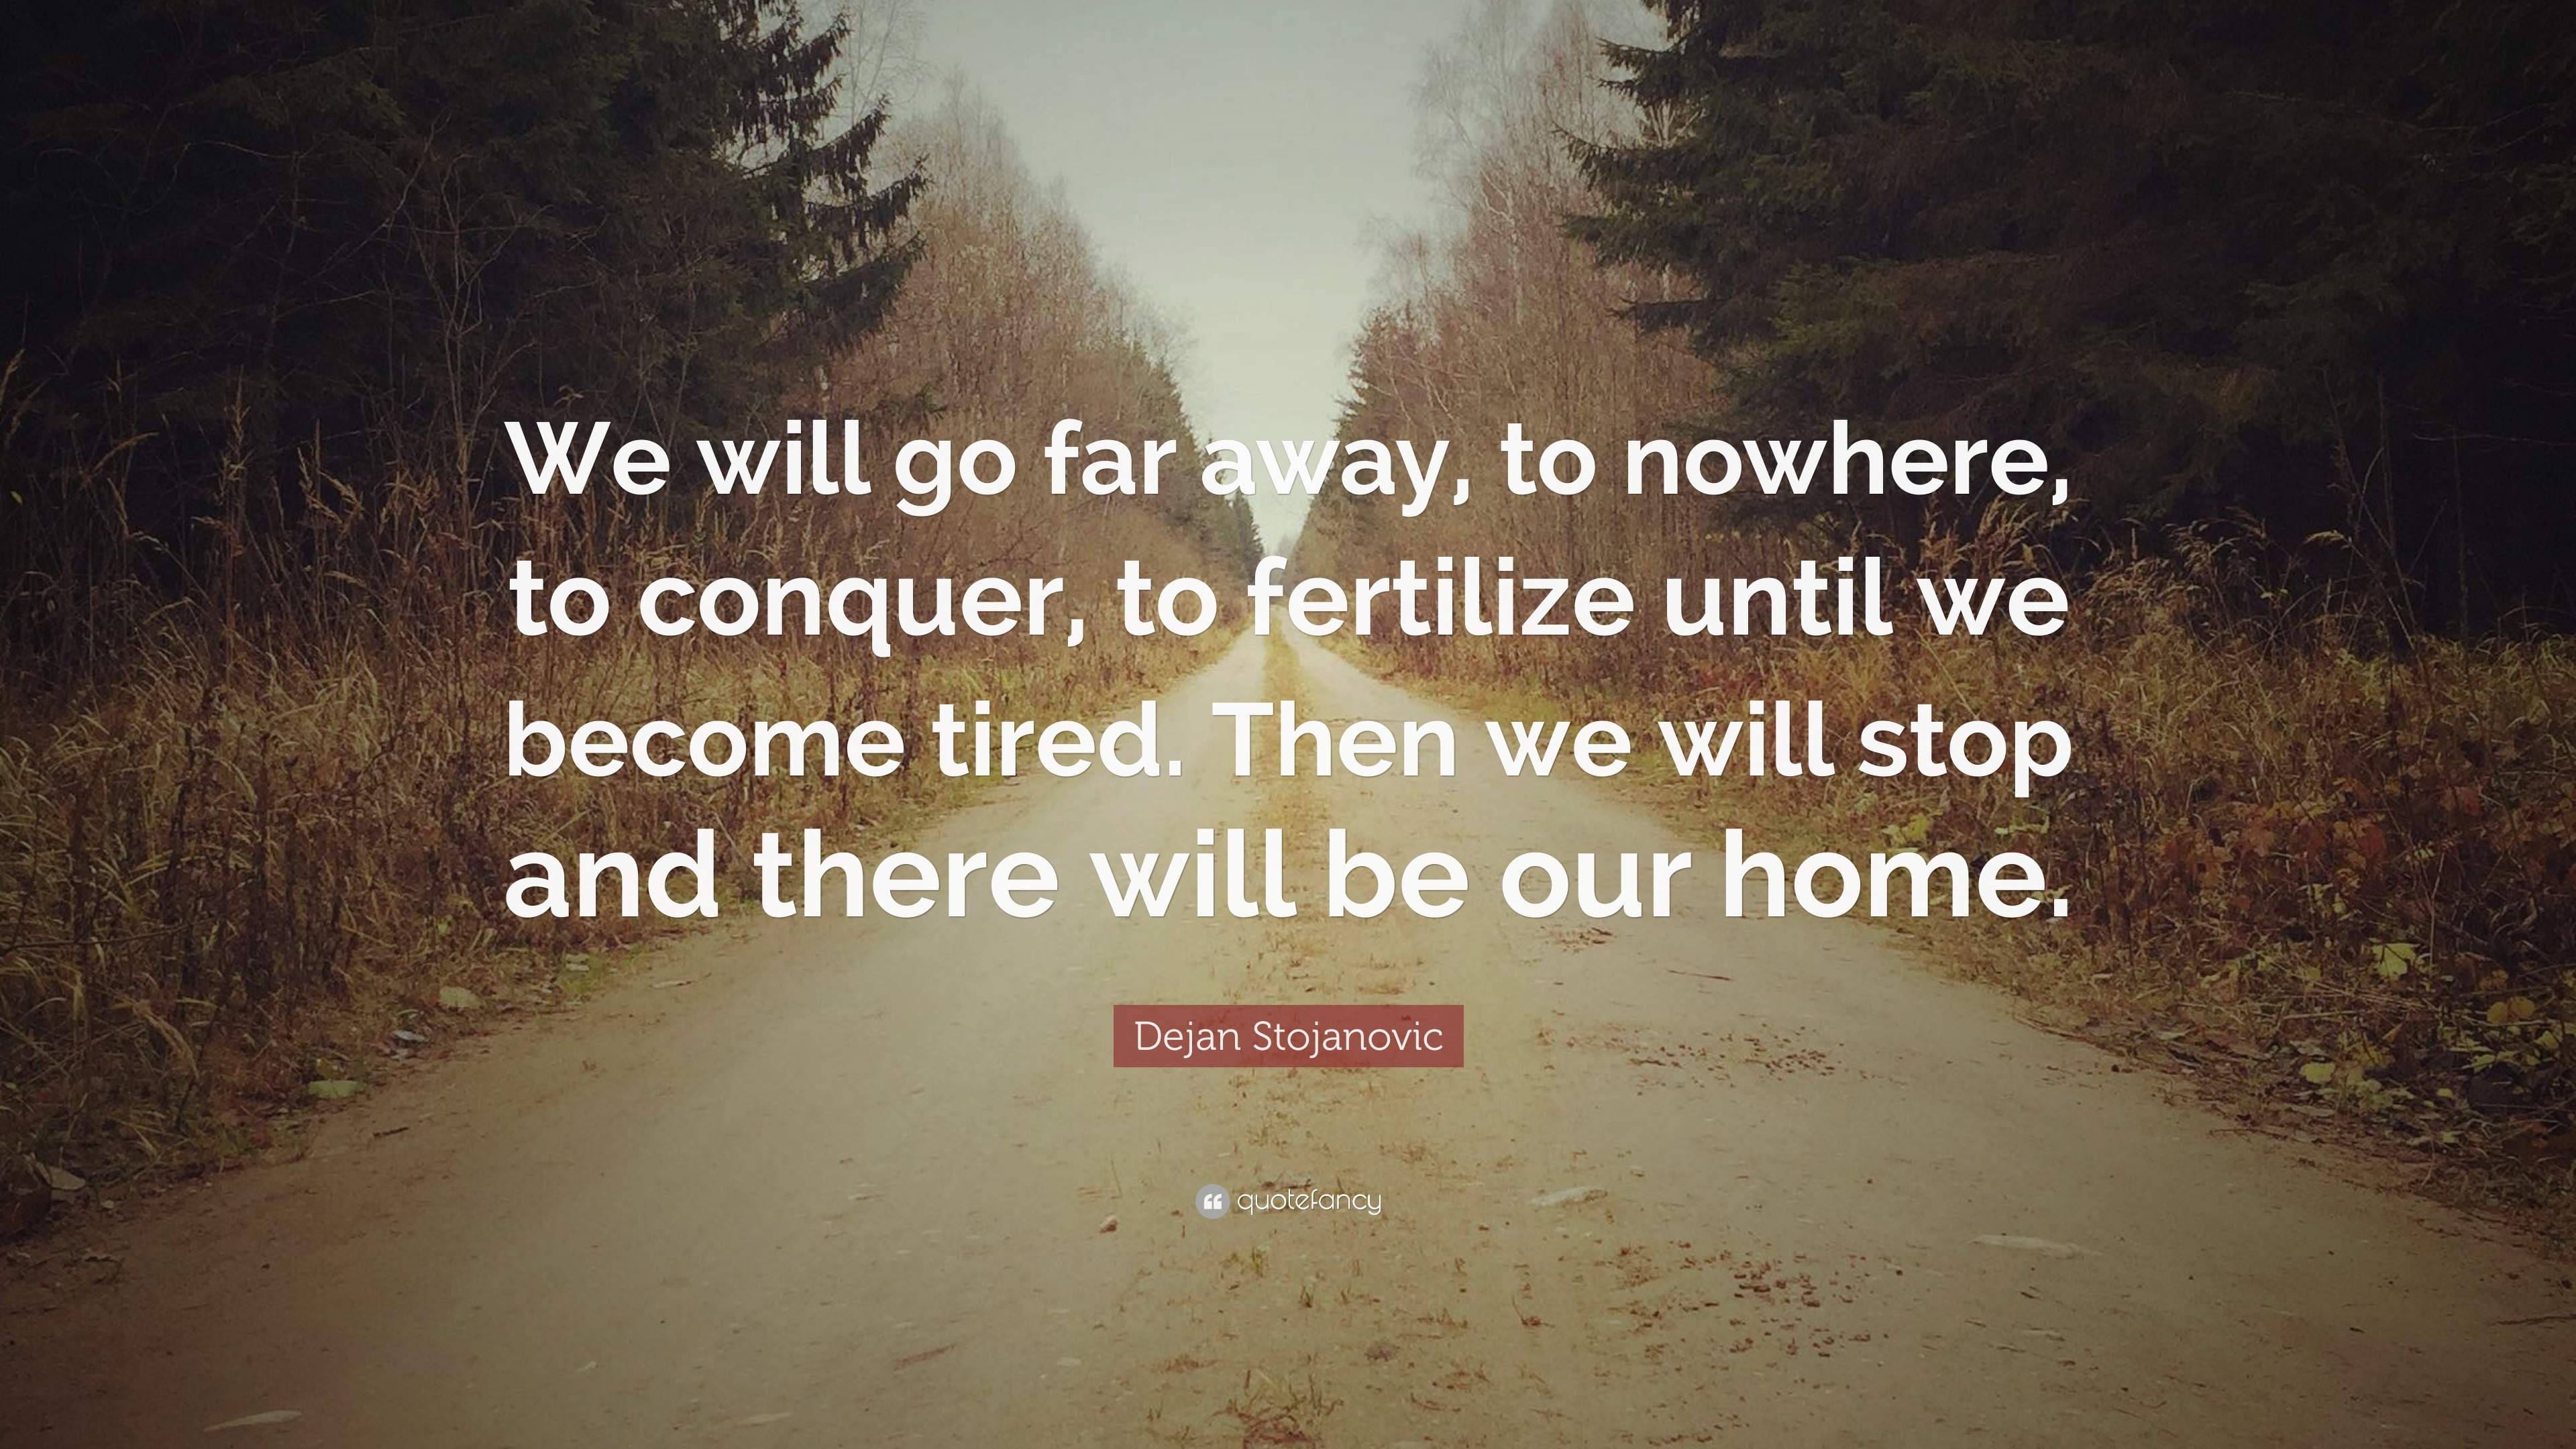 Dejan Stojanovic Quote We Will Go Far Away To Nowhere To Conquer To Fertilize Until We Become Tired Then We Will Stop And There Will Be Our